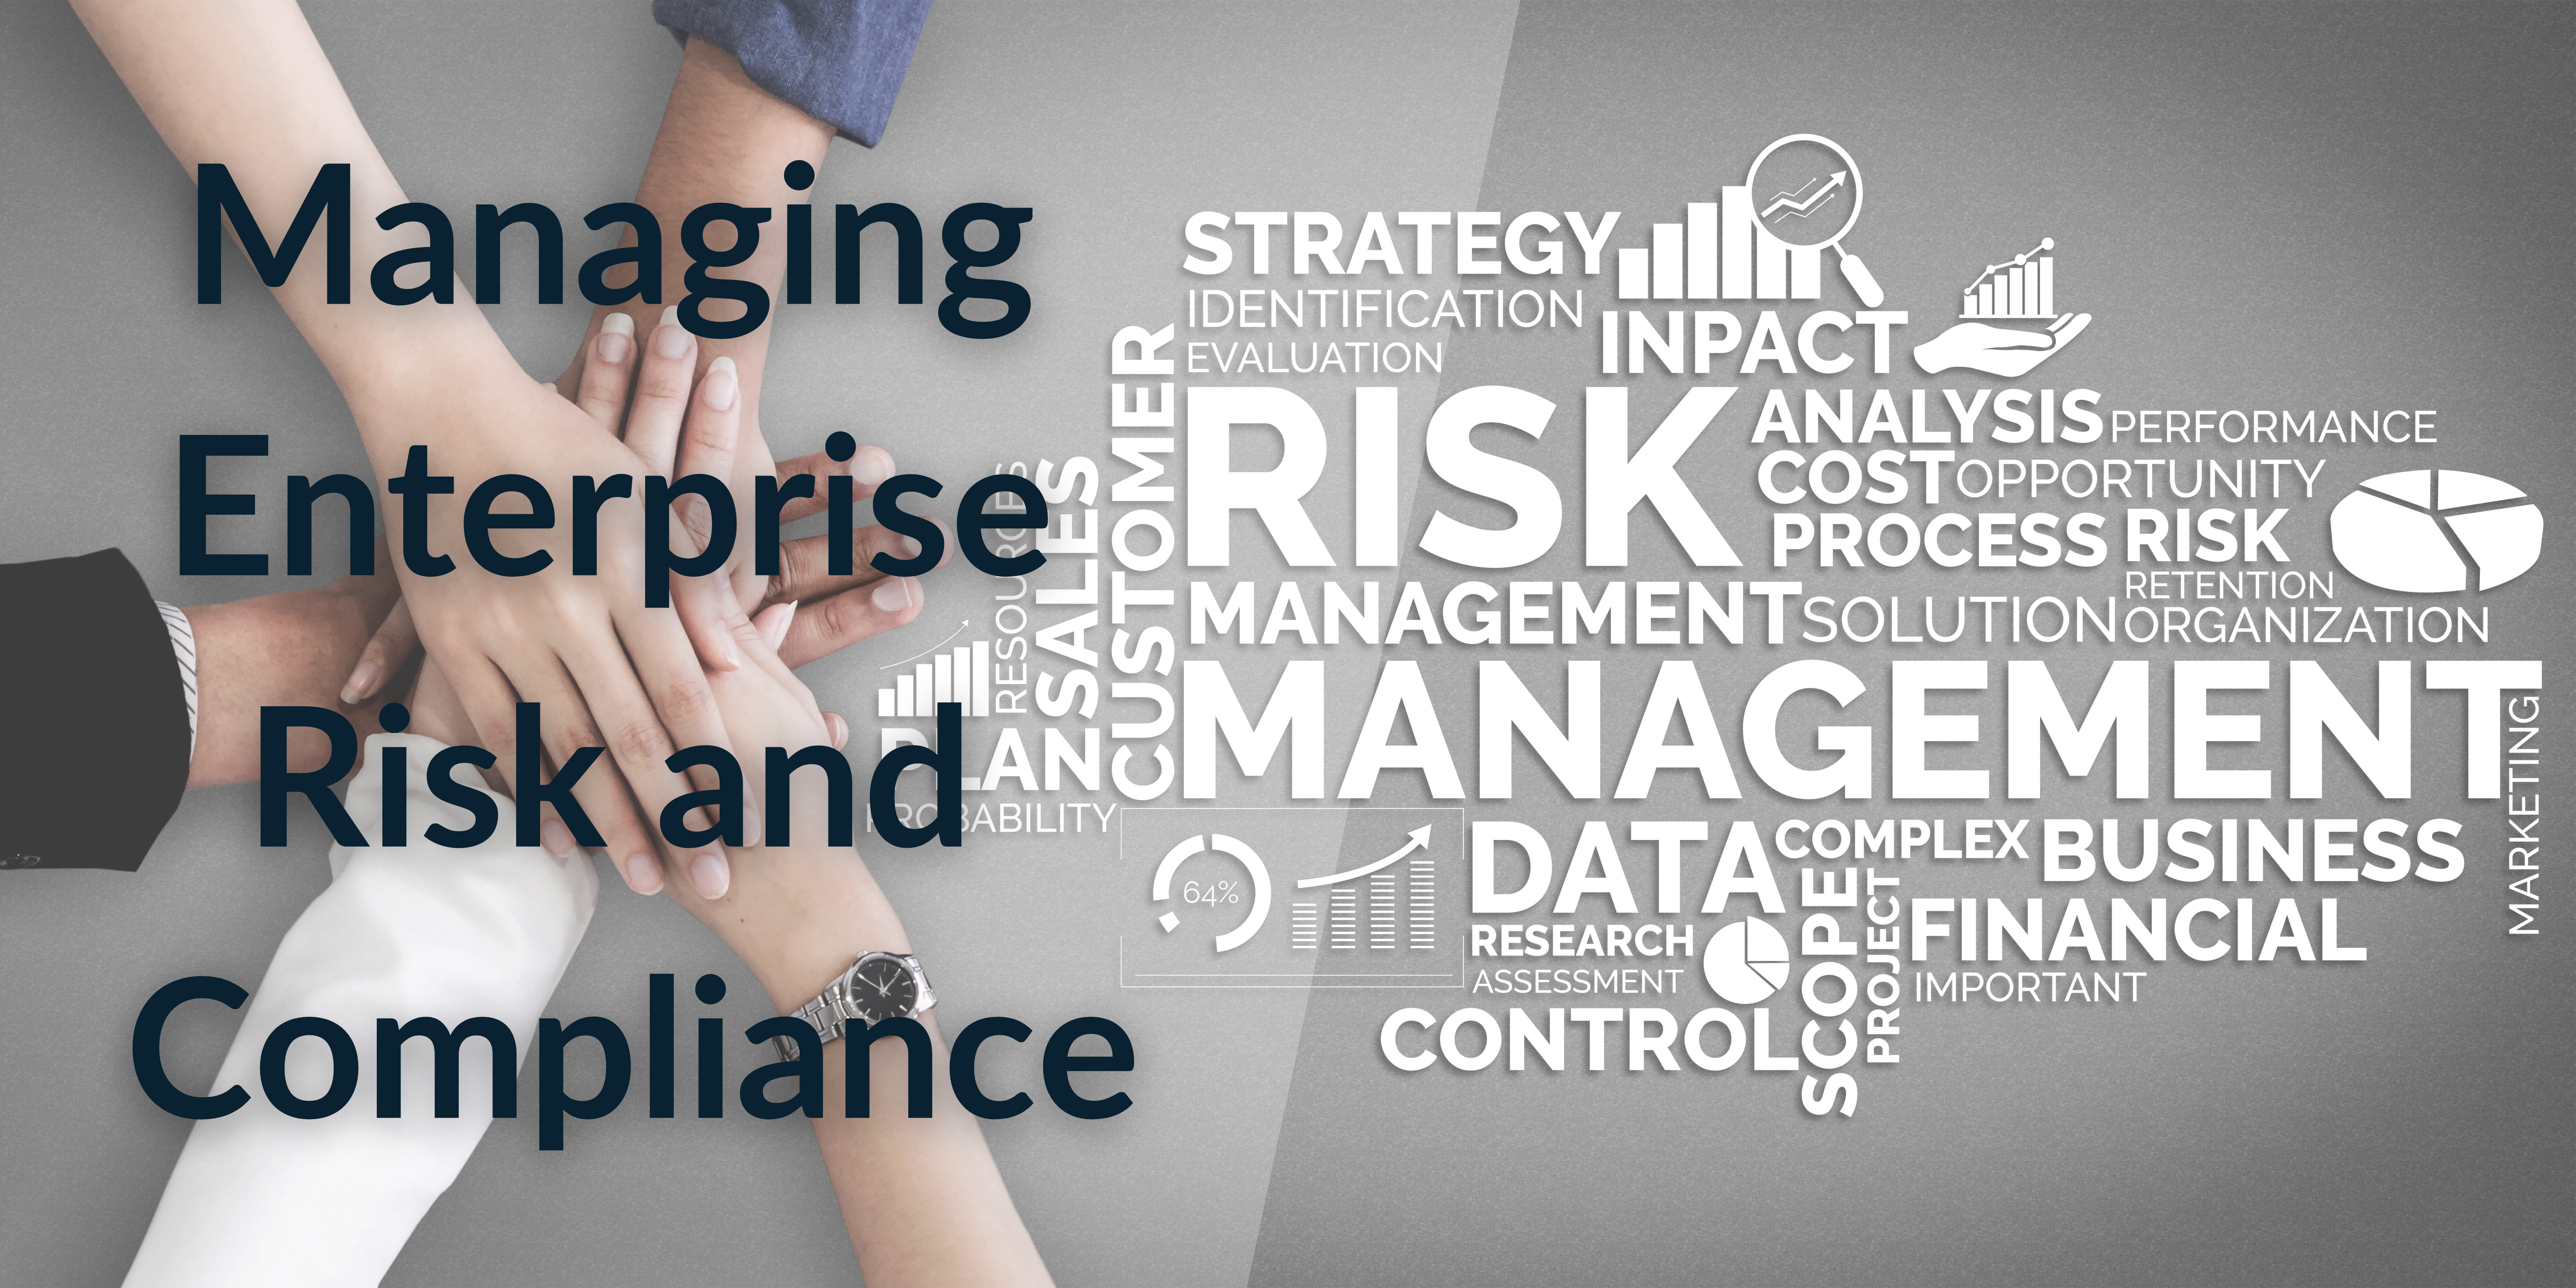 Managing Enterprise Risk and Compliance